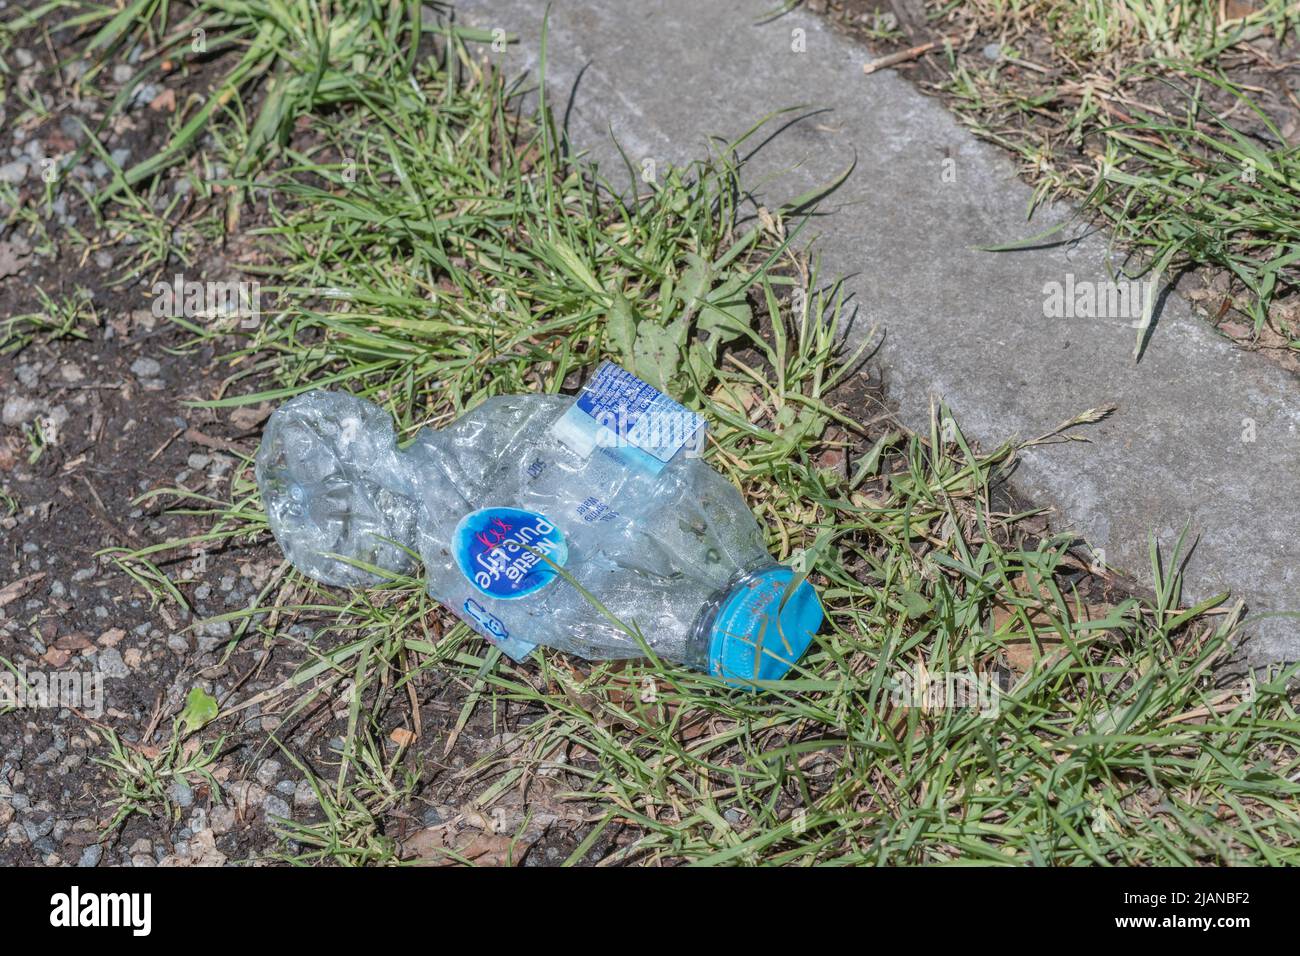 Crushed empty bottle of Nestlé Pure Life bottled water at side of rural country road. For environmental plastic pollution, single use plastics. Stock Photo